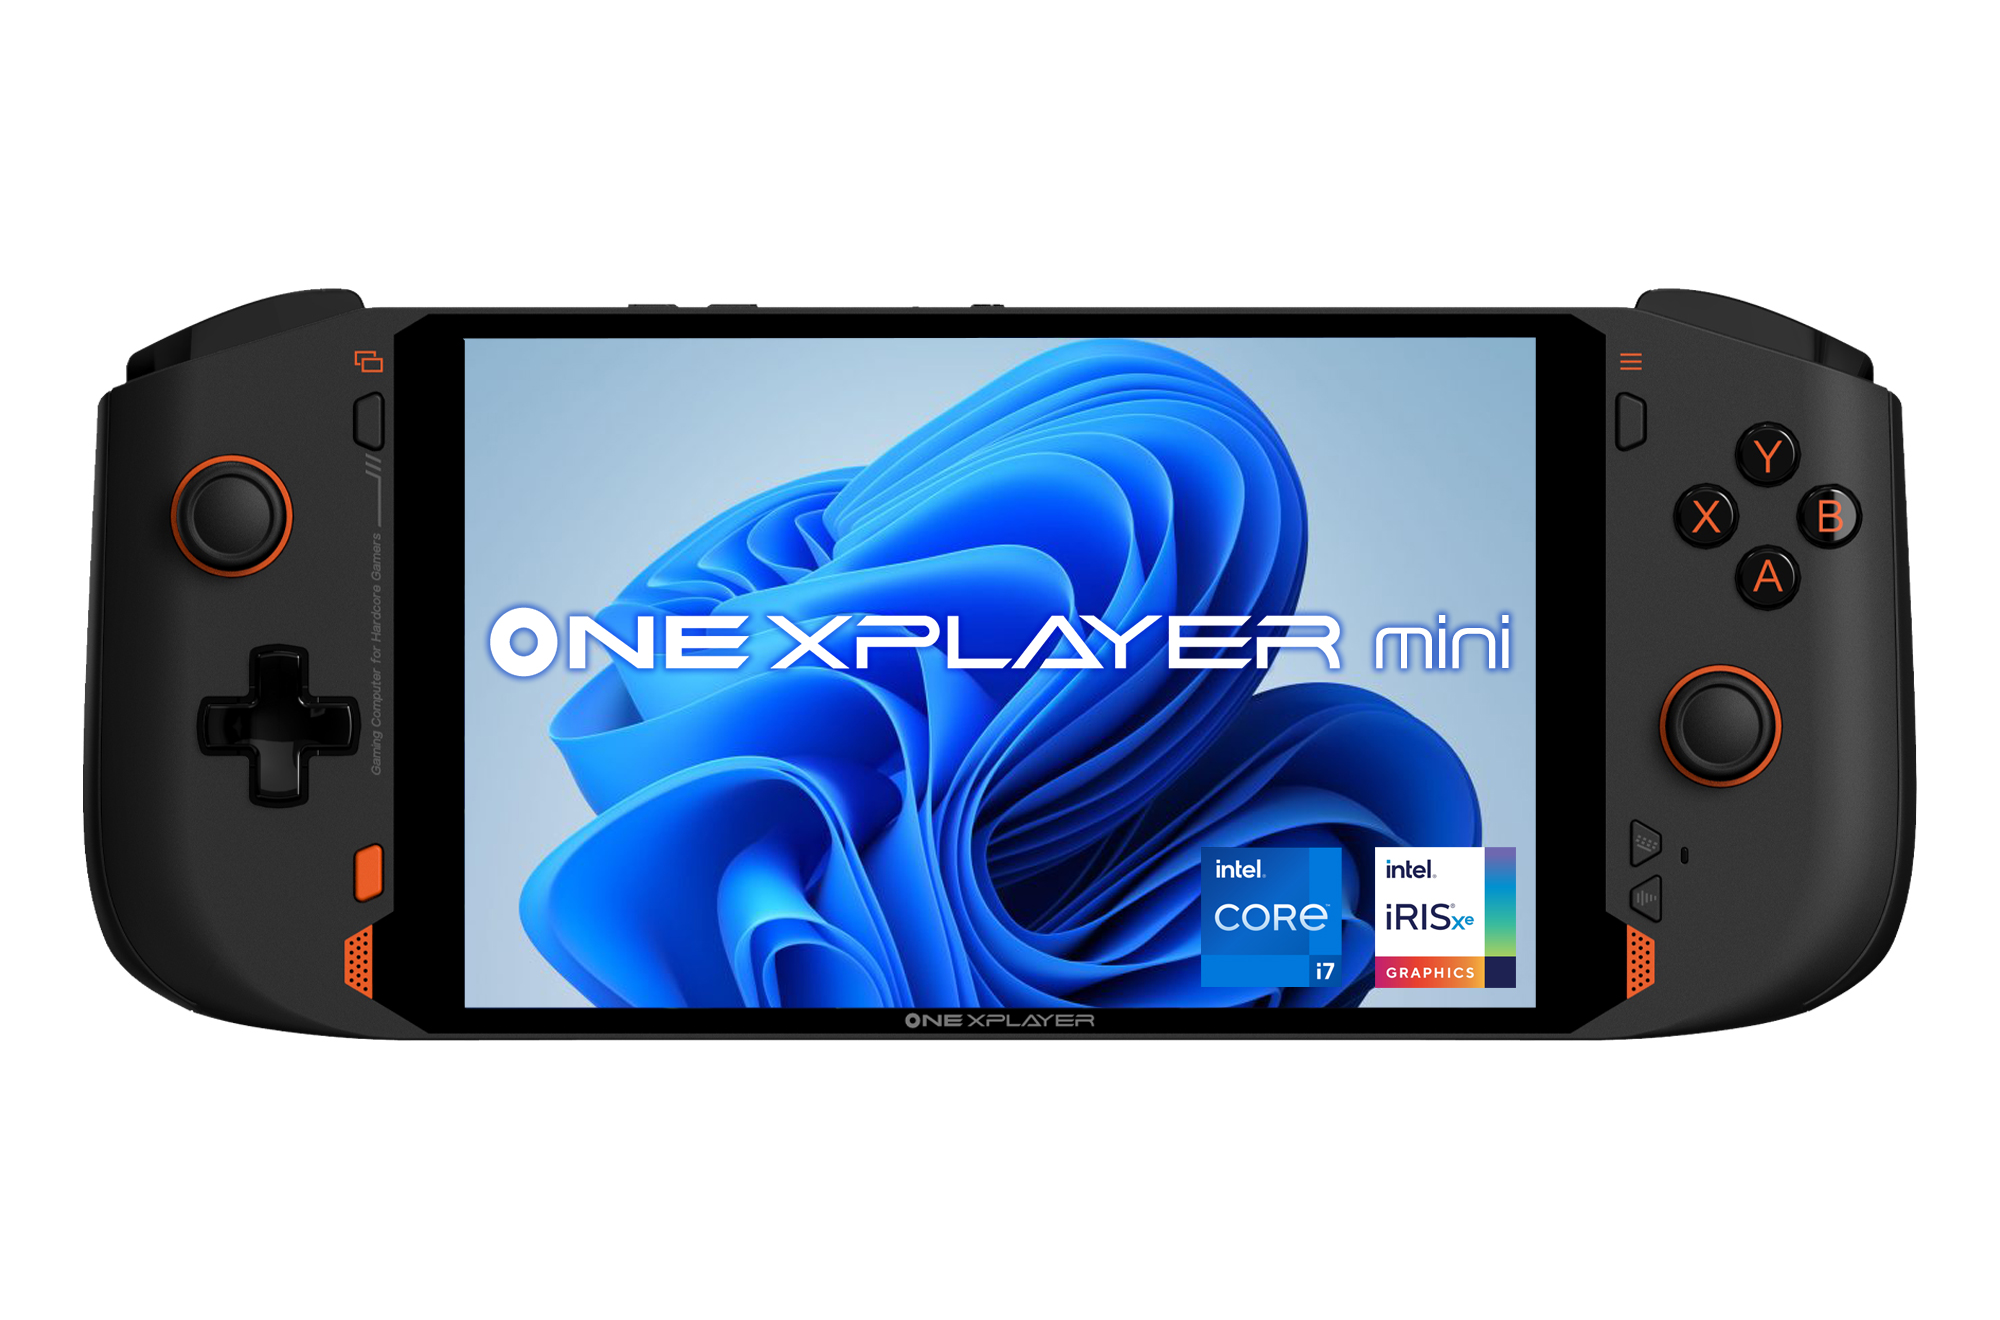 ONEXPLAYER mini launches with a 7-inch and 1200p display plus an 